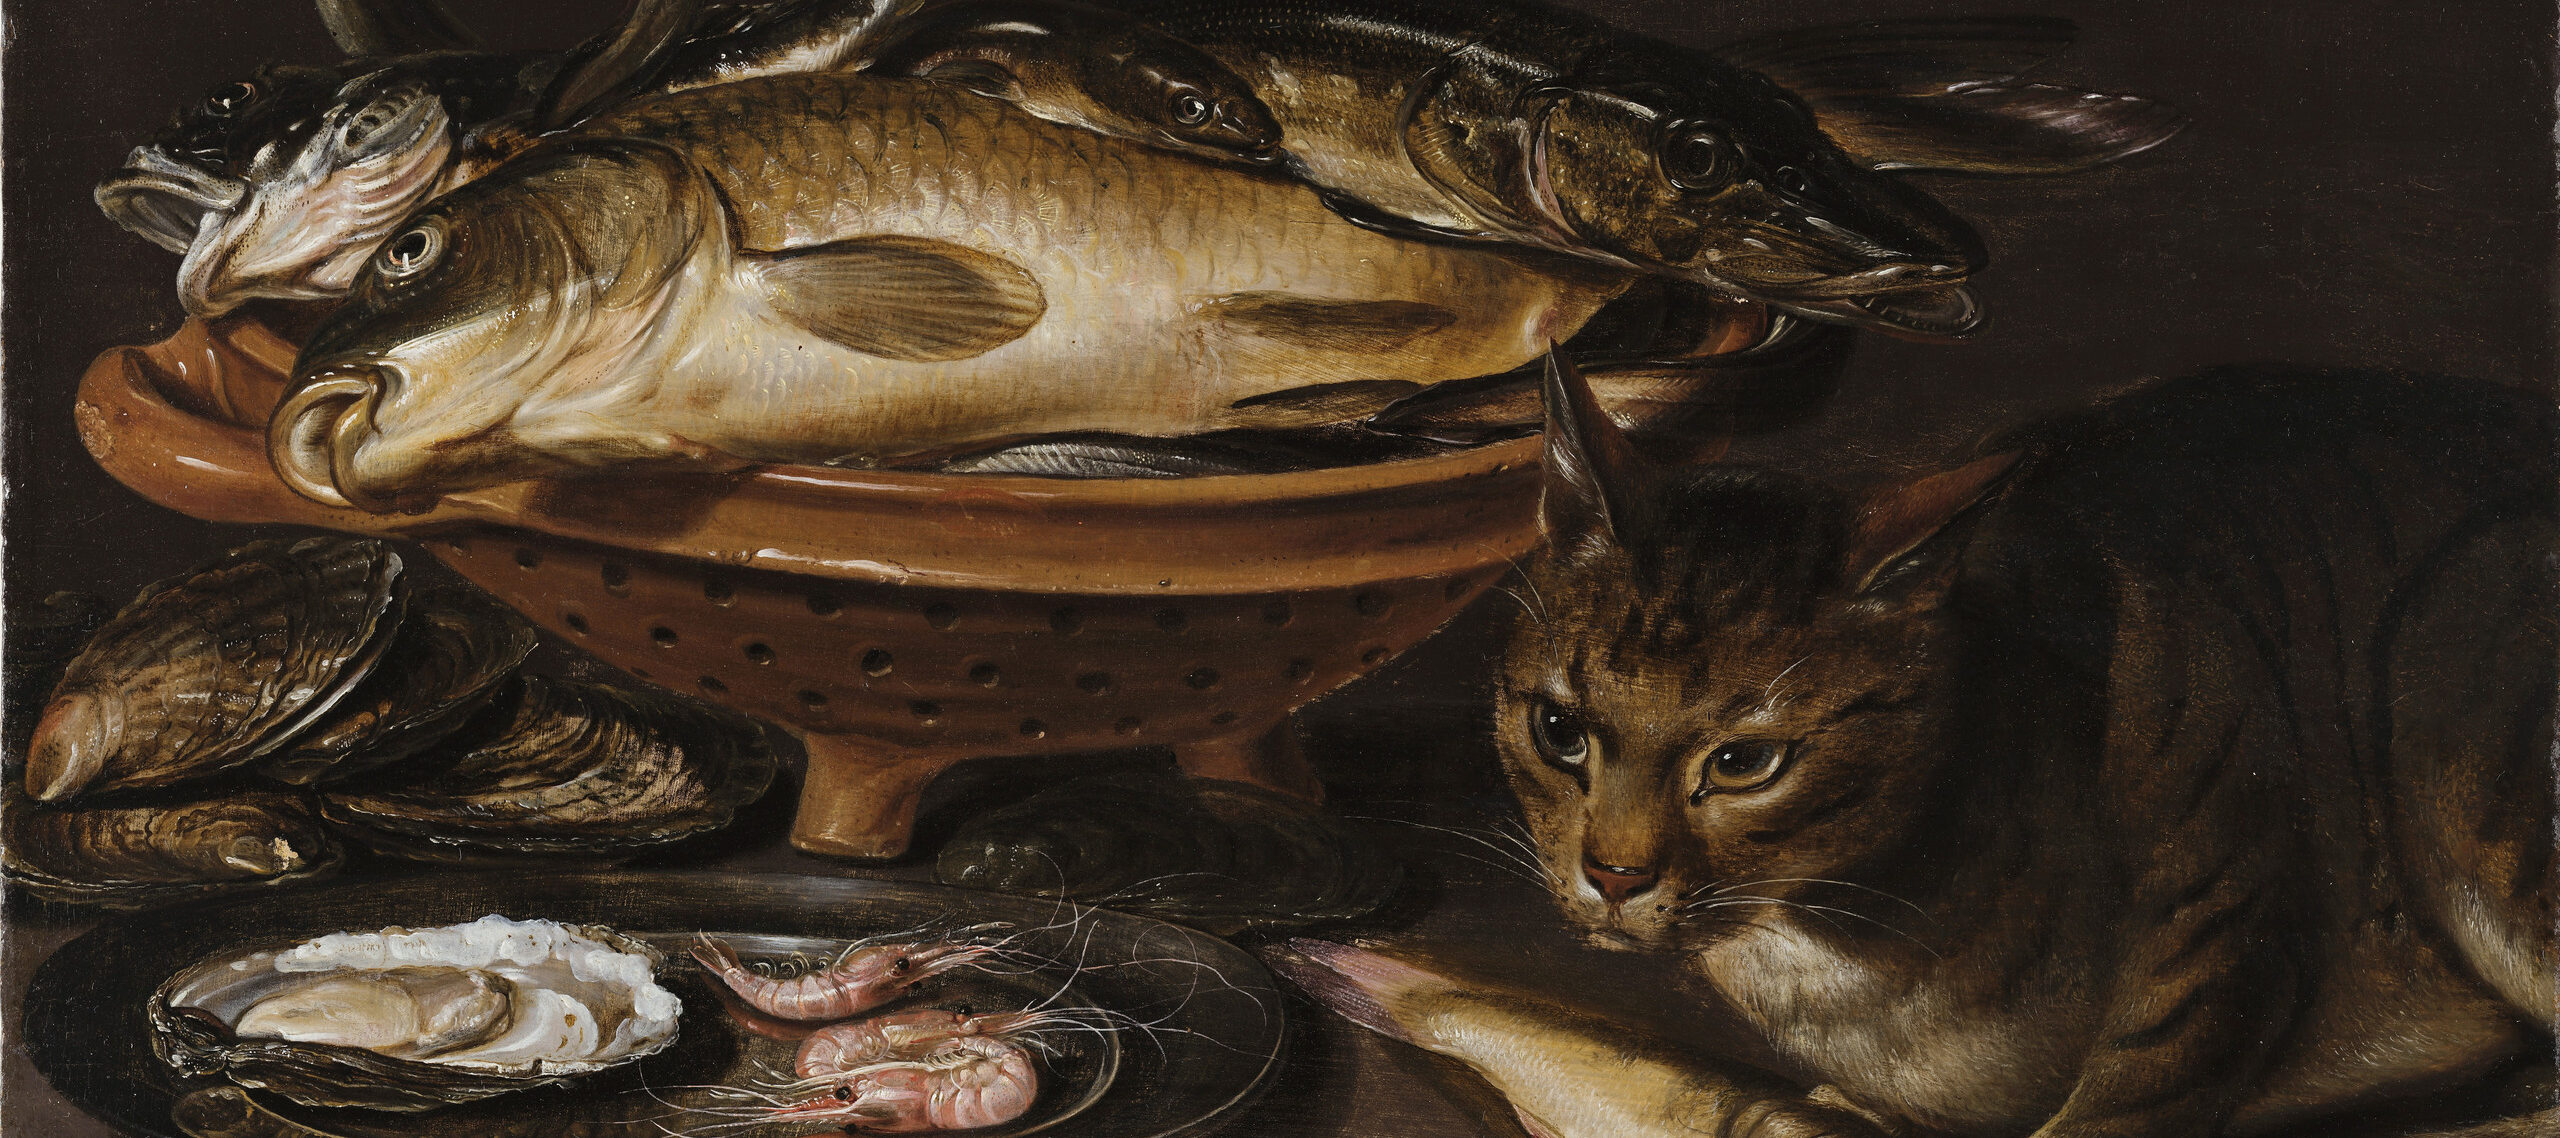 Still life painting features a reddish ceramic colander with several types of fish. In the foreground, a cat stands alert next to shrimp and oyster shells on a gleaming pewter dish.